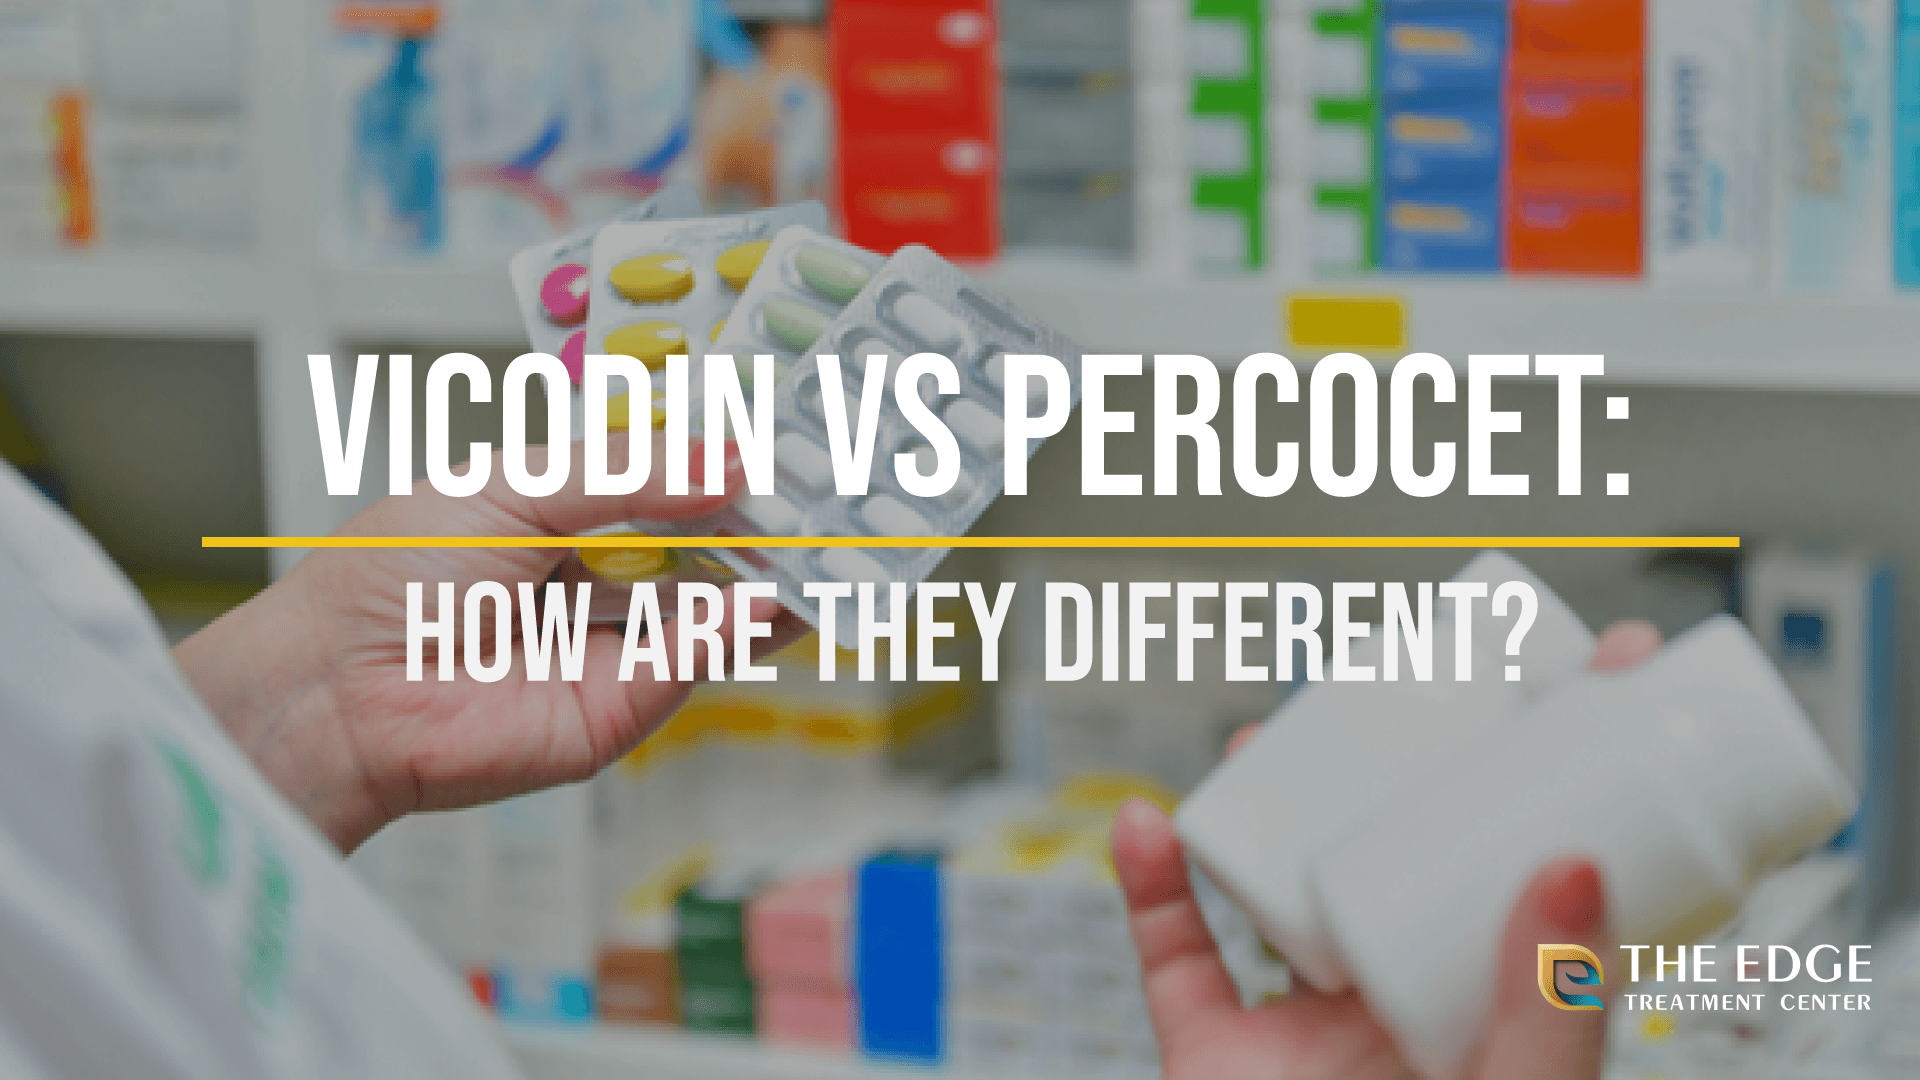 Vicodin vs Percocet: Do You Know the Differences Between These Prescription Drugs?